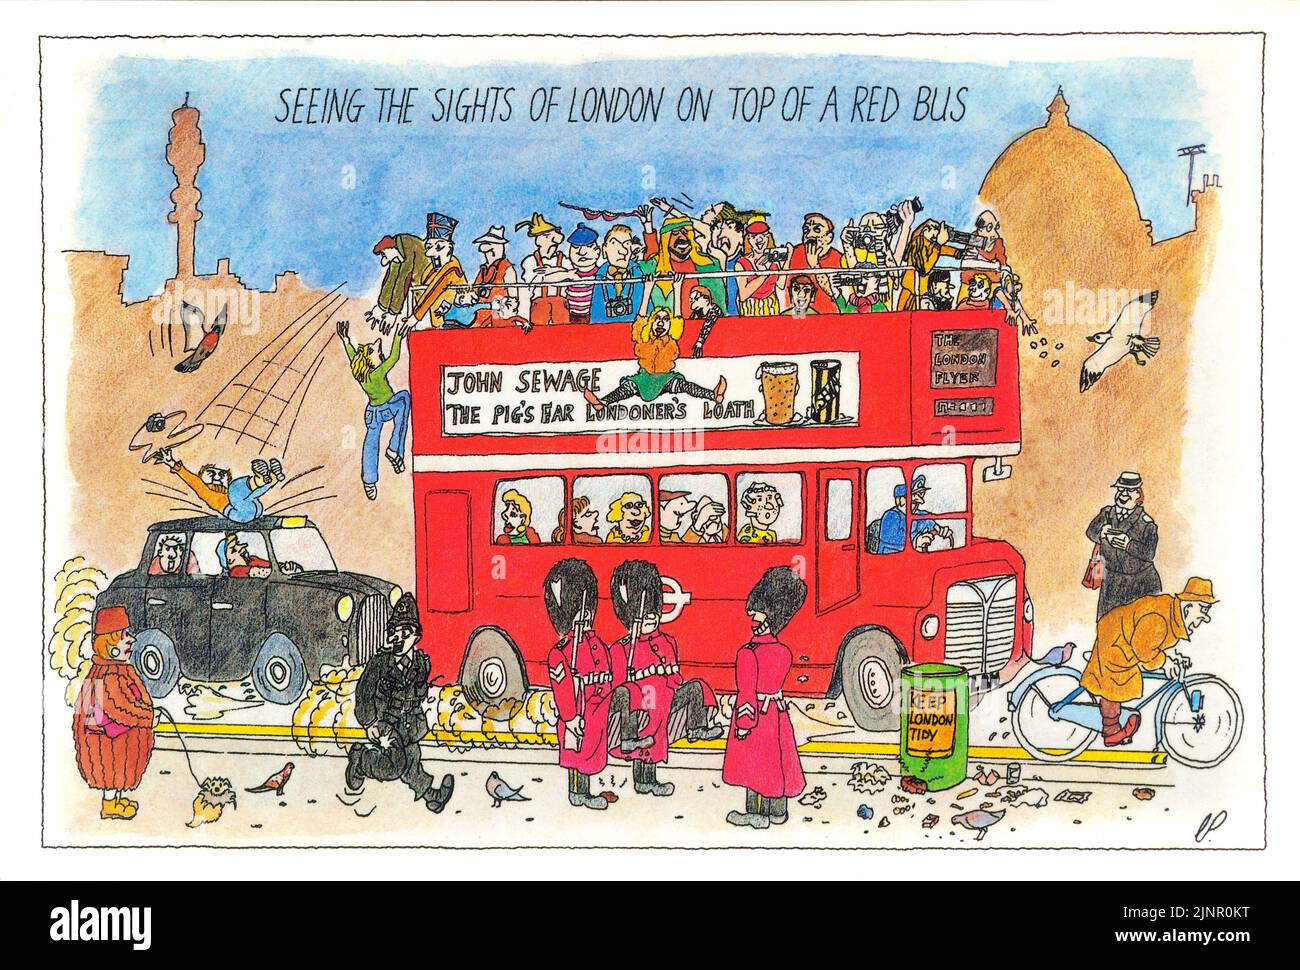 Seeing the sights of London on top of a red bus.1980's amusing funny London postcard by Chris Parker Stock Photo